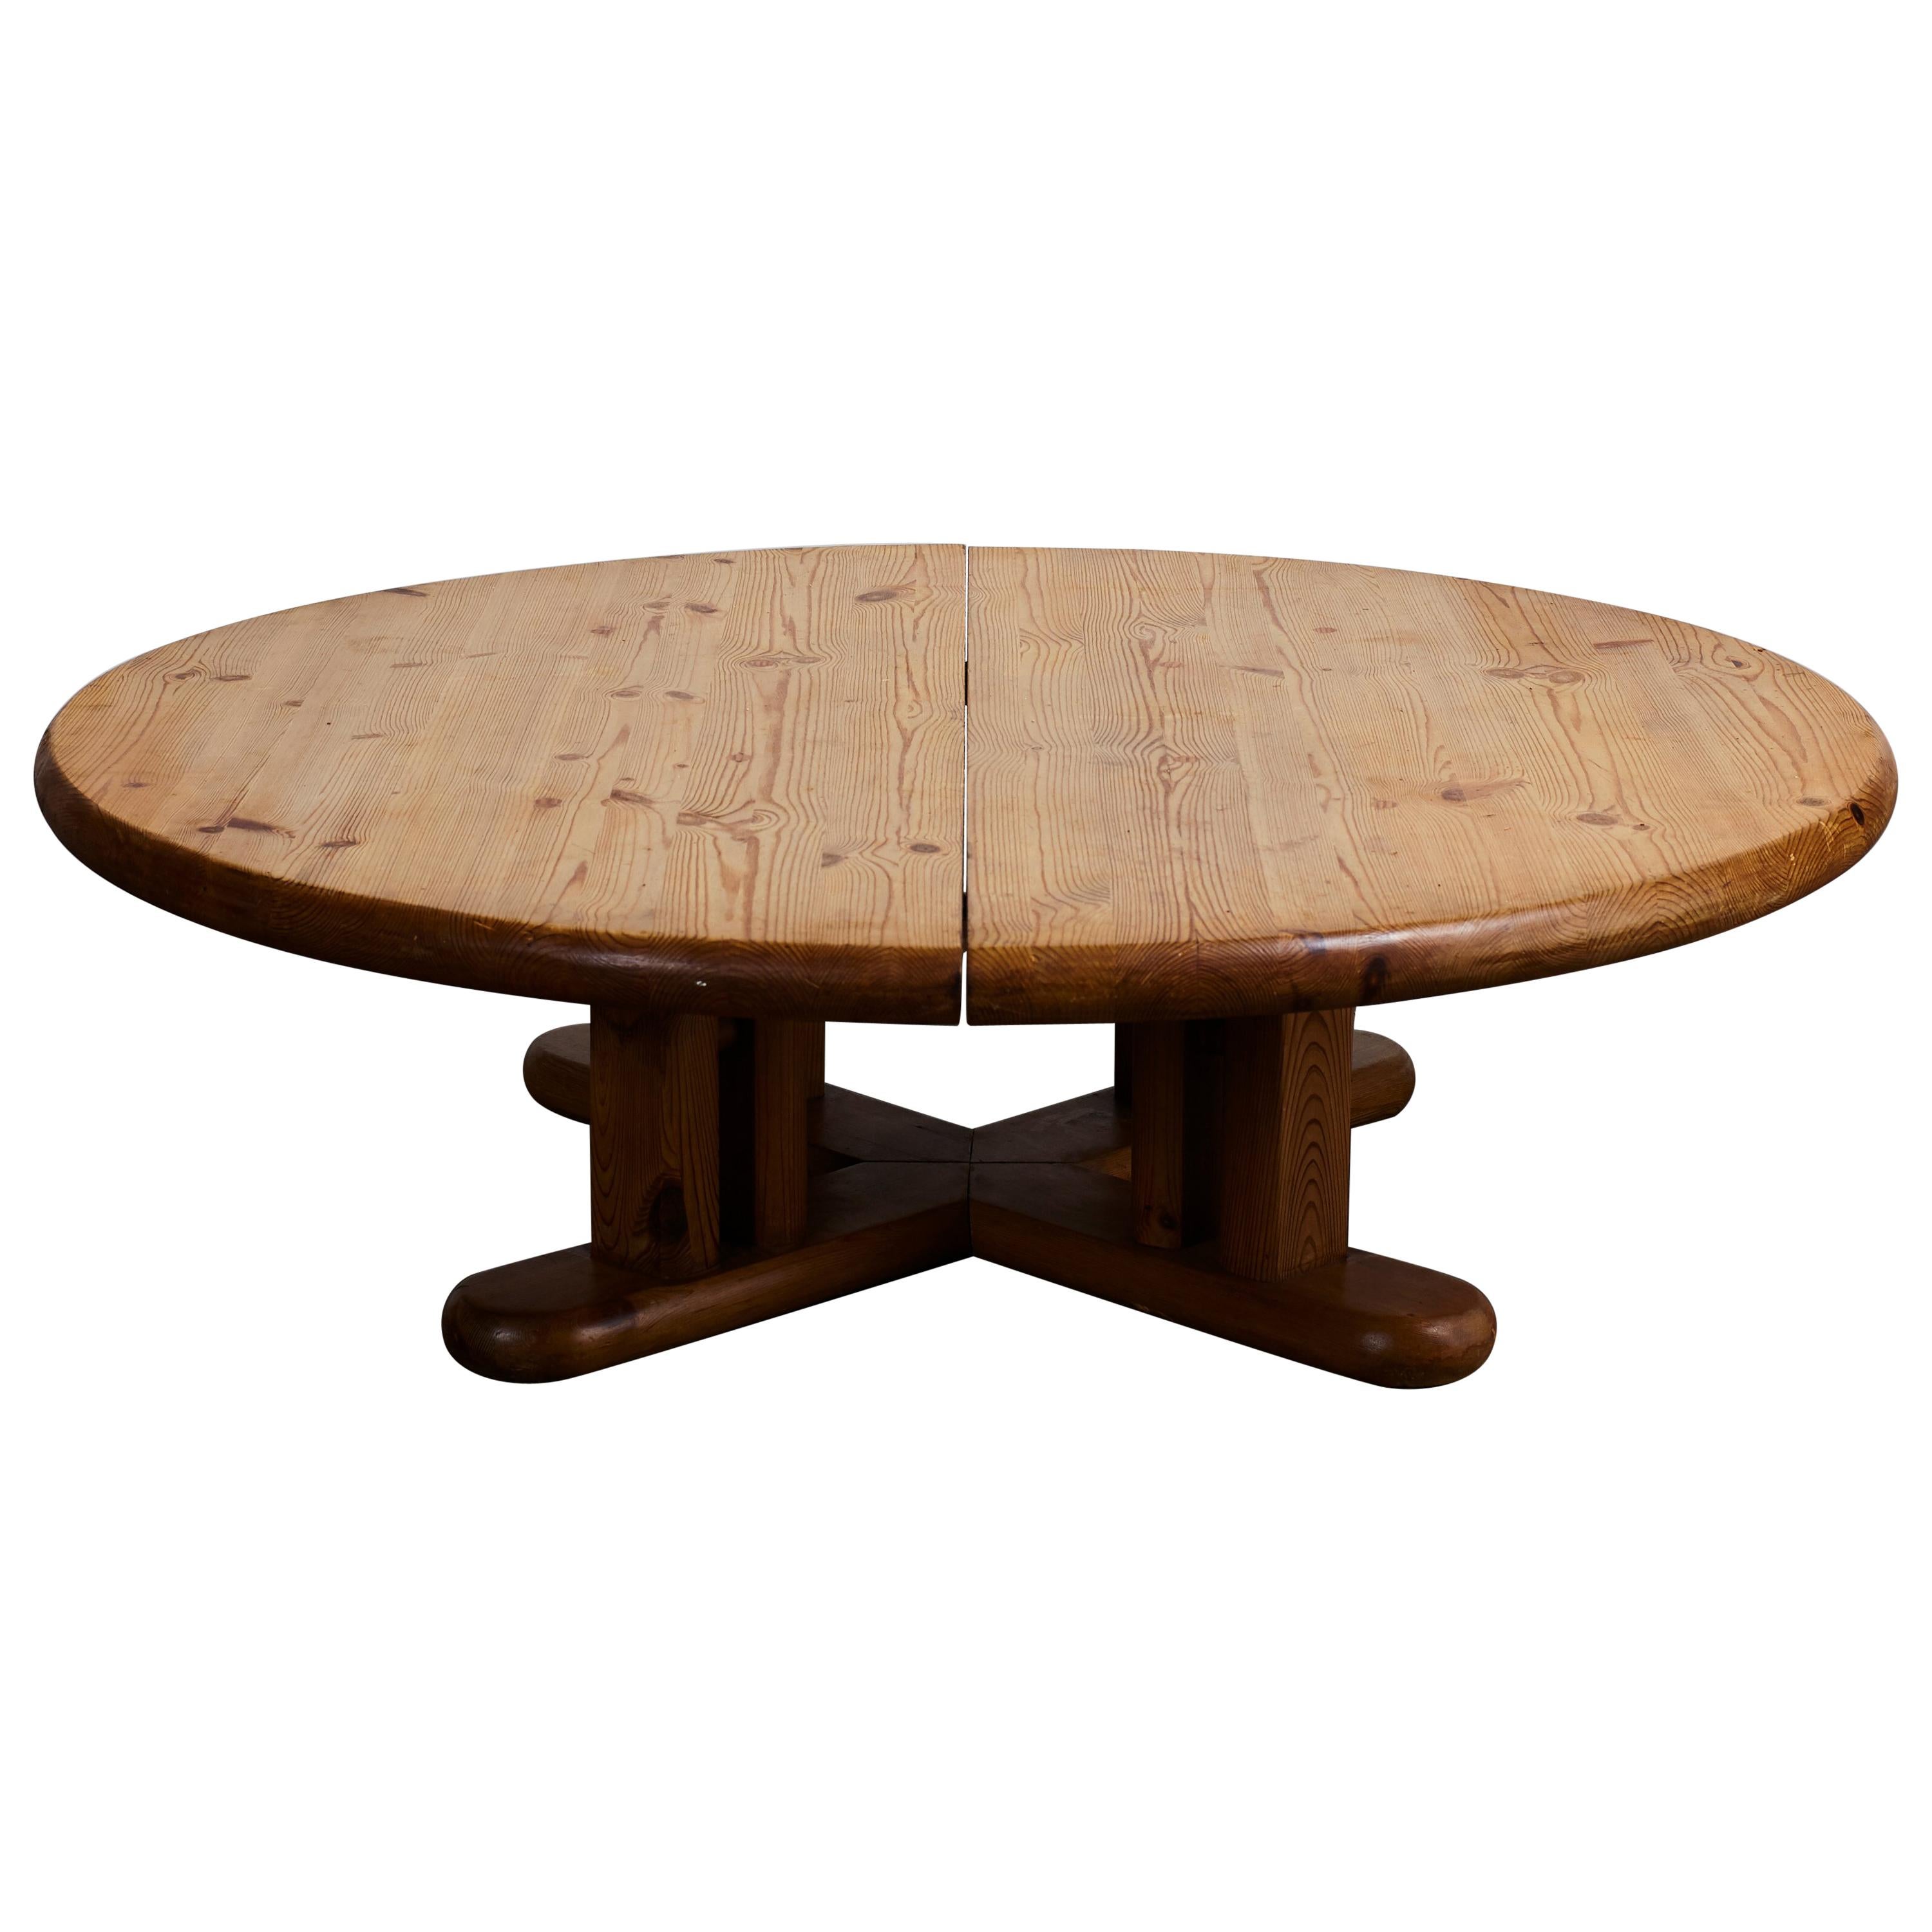 French Pine Round Coffee Table with Cross Leg Base